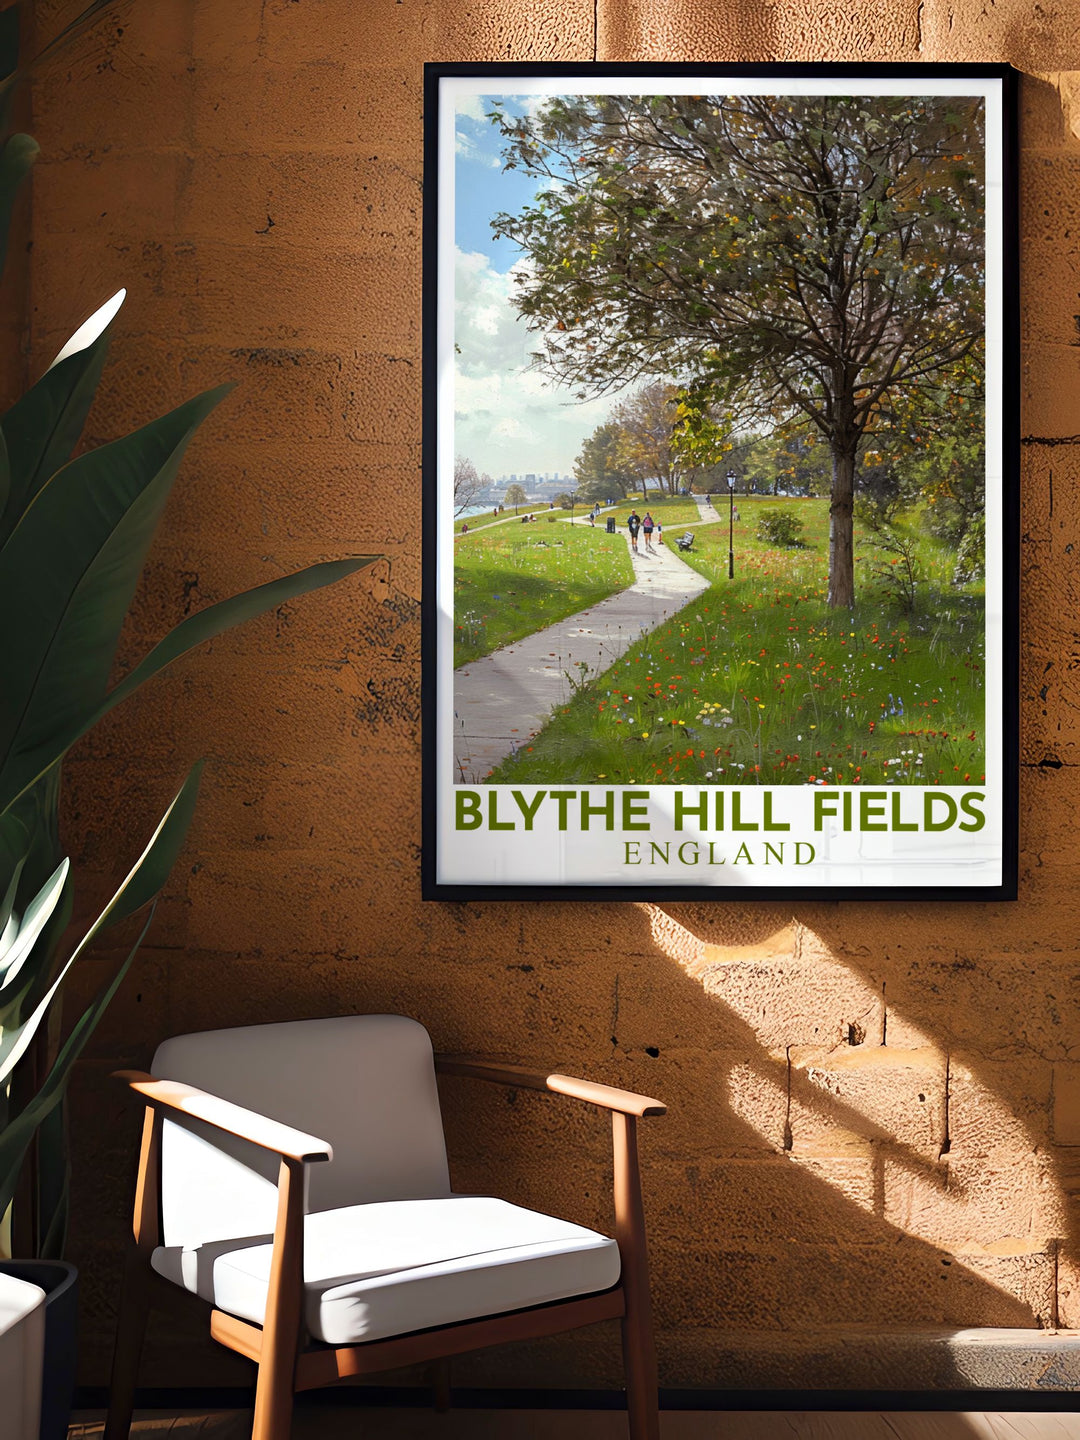 Featuring the rolling hills and scenic paths of Blythe Hill Fields, this travel poster captures the natural beauty of South East London, ideal for those who appreciate serene landscapes.